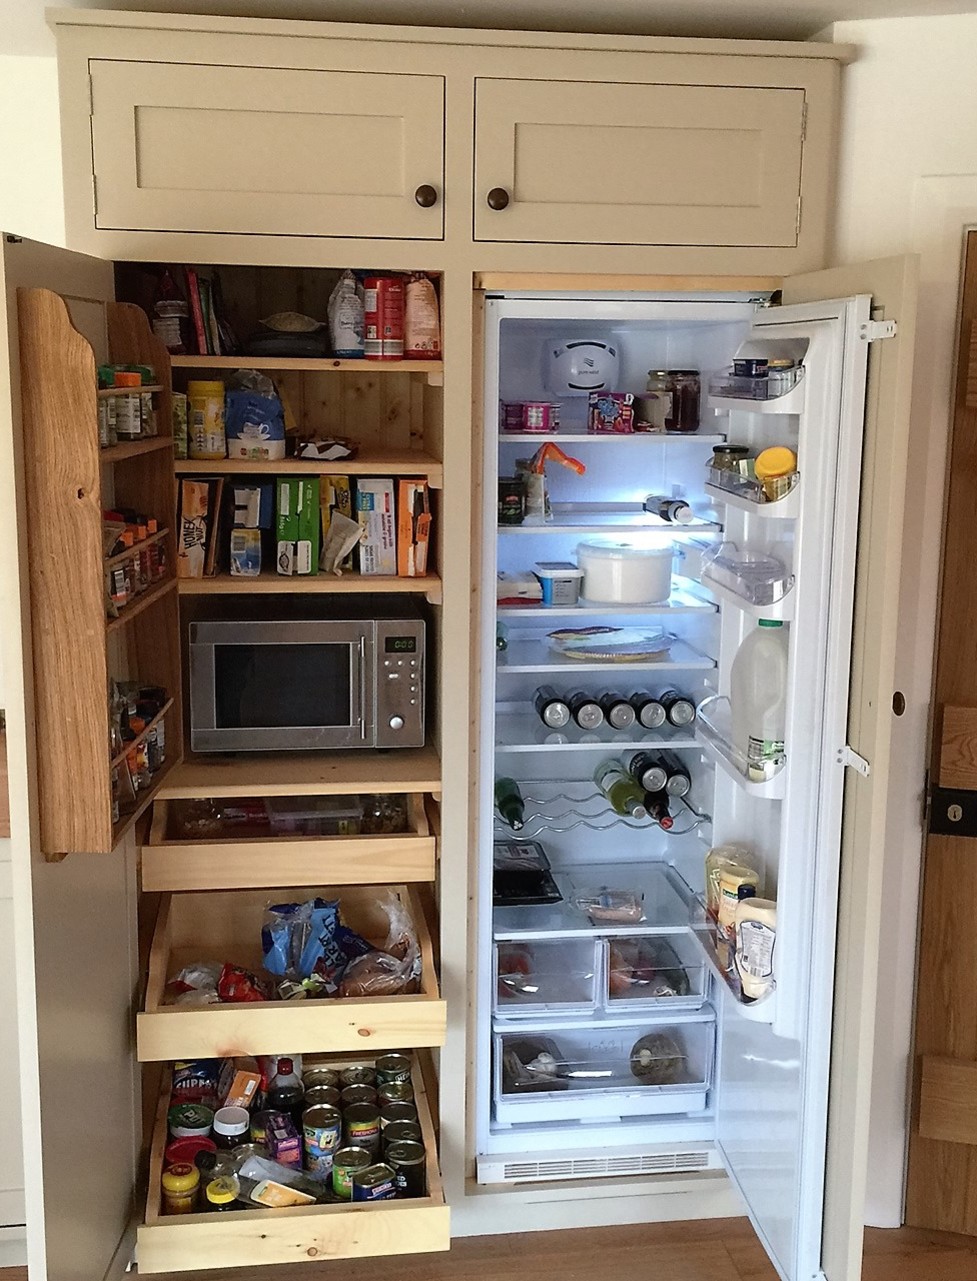 Fully bespoke housekeepers cupboard incorporating integrated fridge, hand built from solid wood.